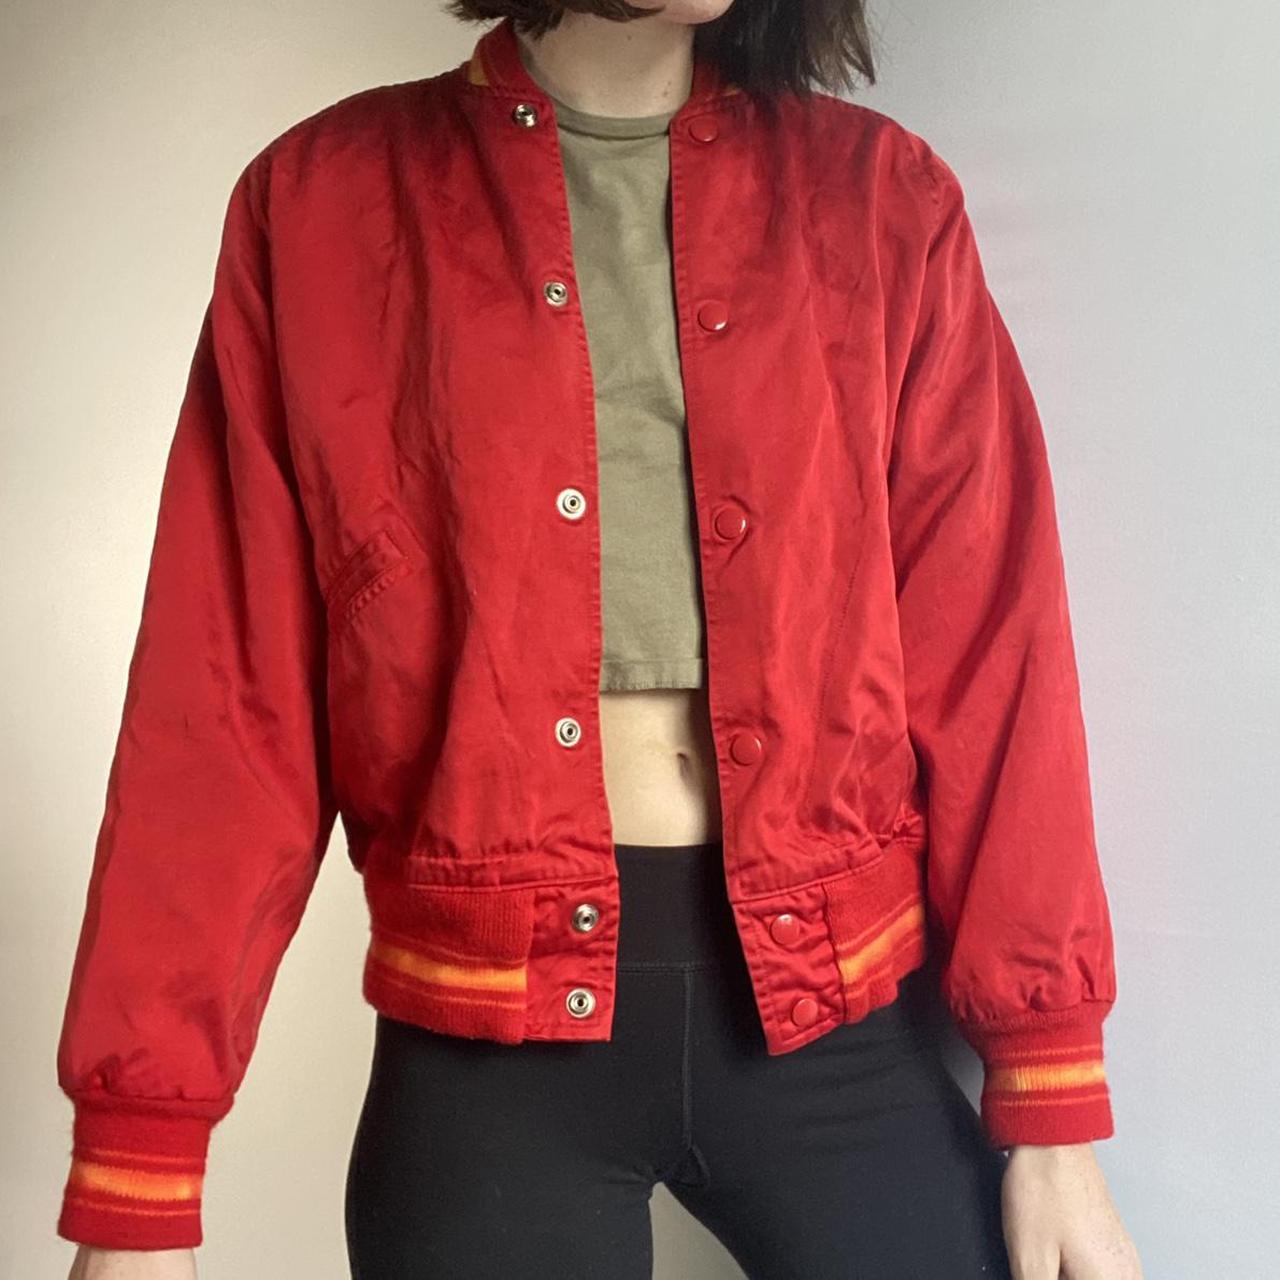 Product Image 3 - Red Bomber Jacket!

In great condition!

msg